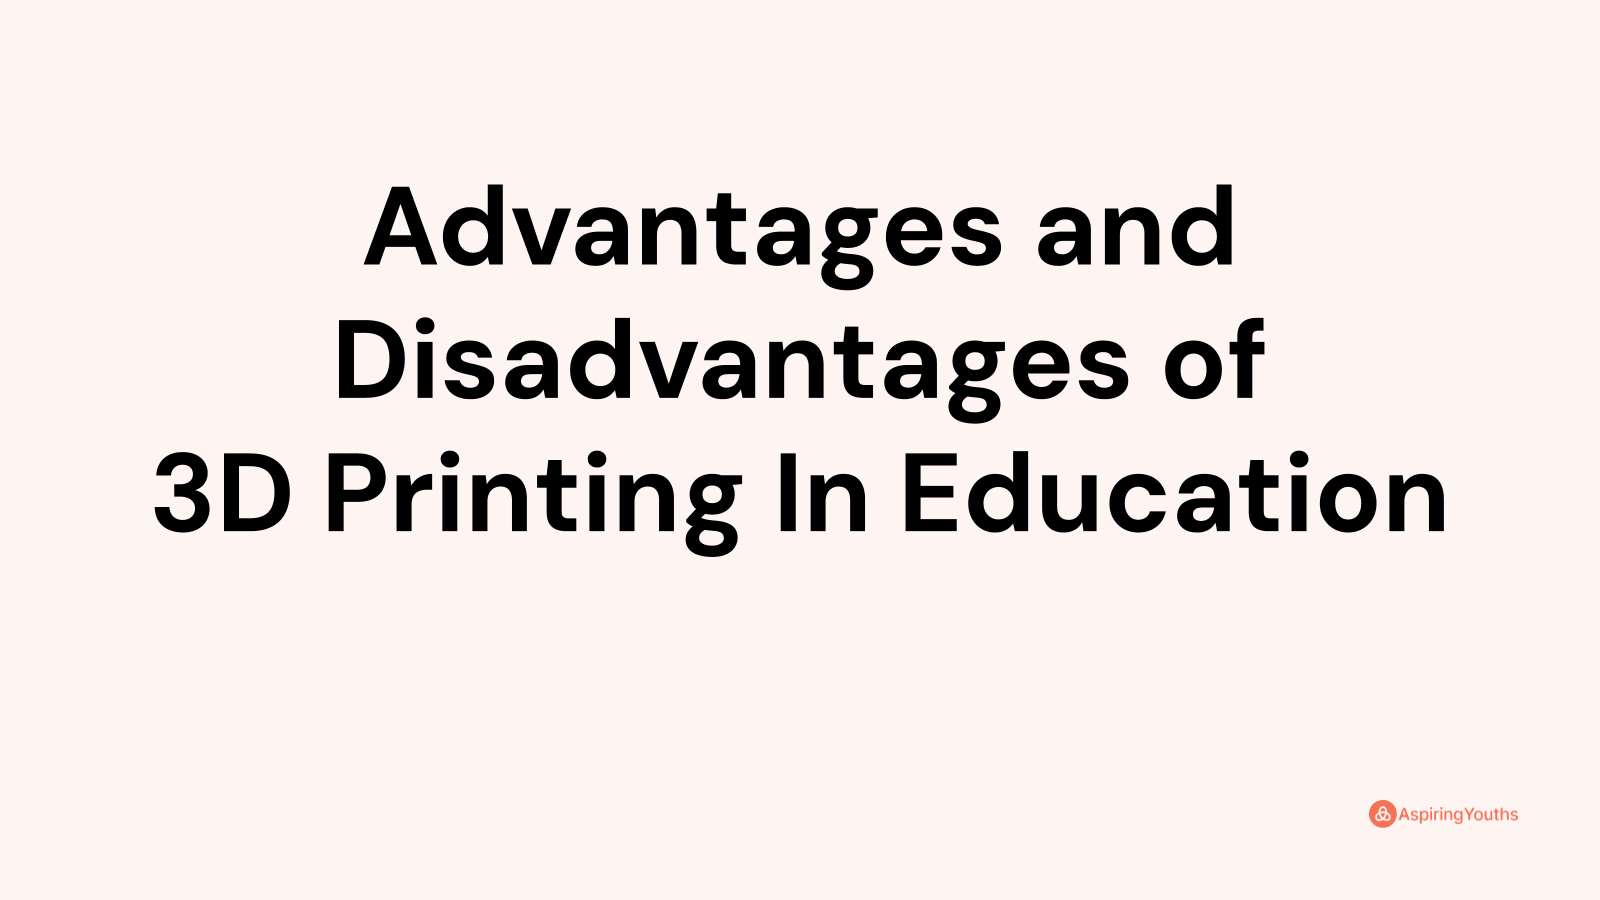 Advantages and disadvantages of 3D Printing In Education